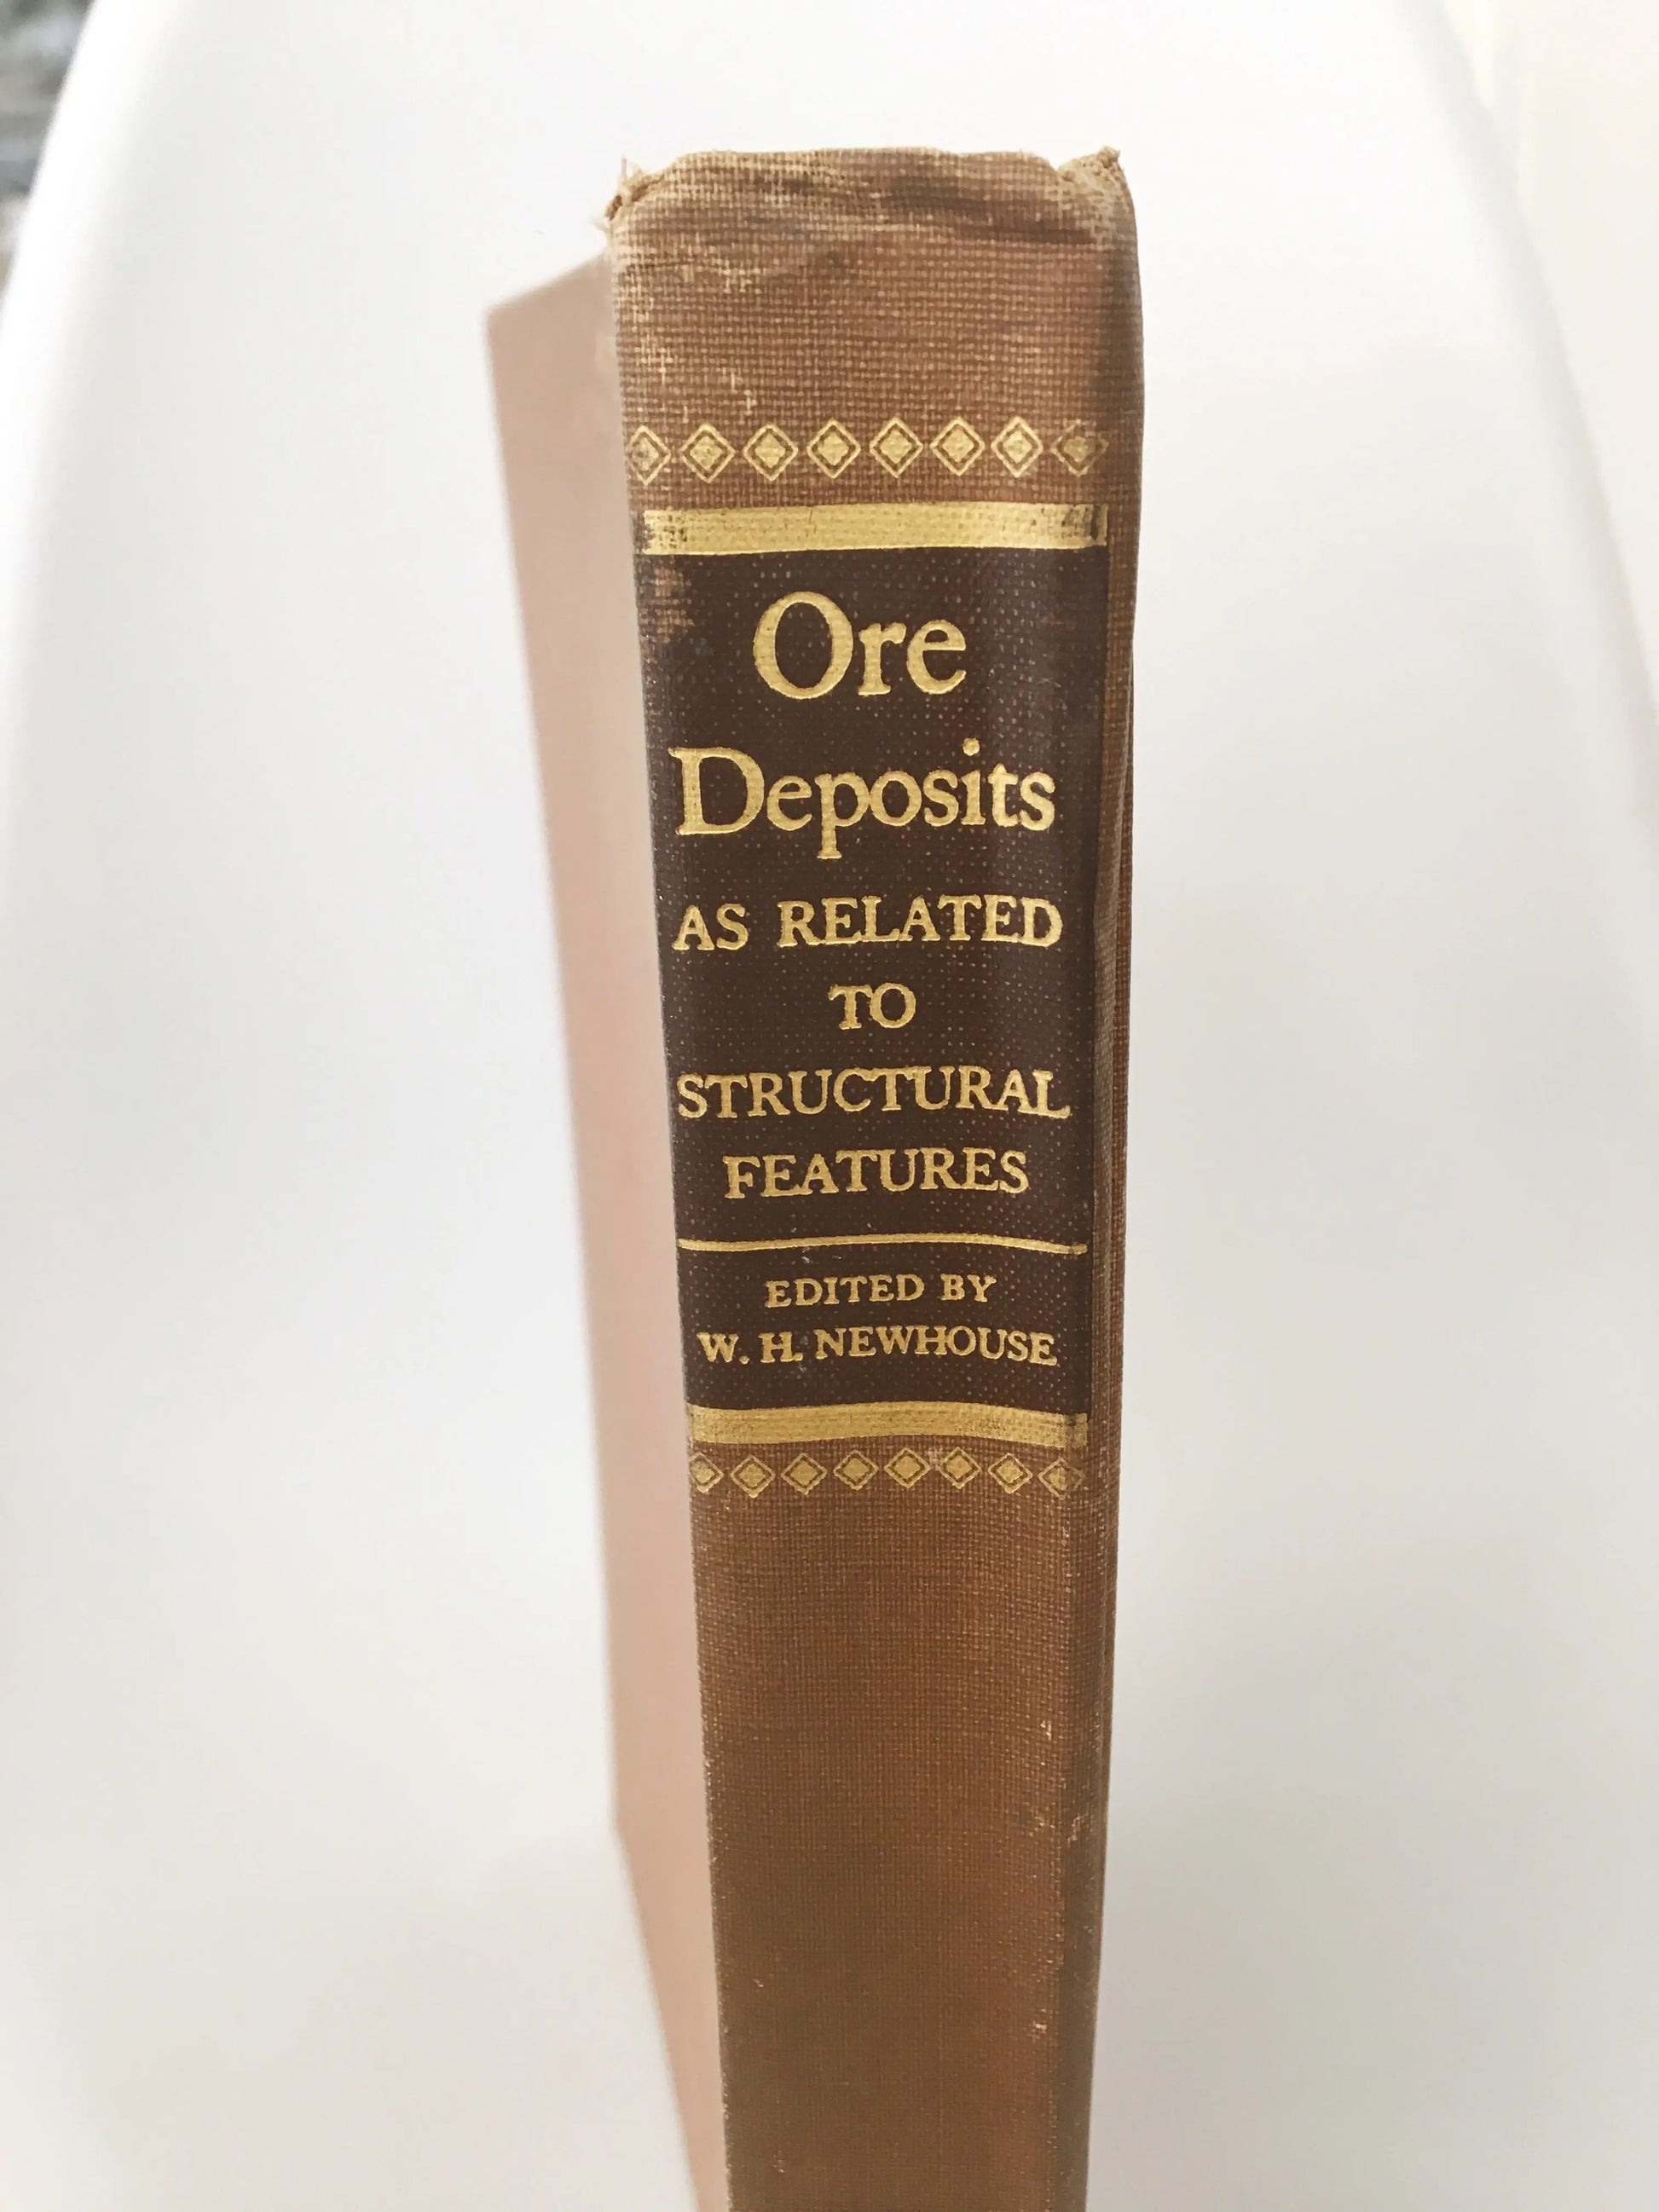 Ore Deposits as Related to Structural Features - Stemcell Science Shop